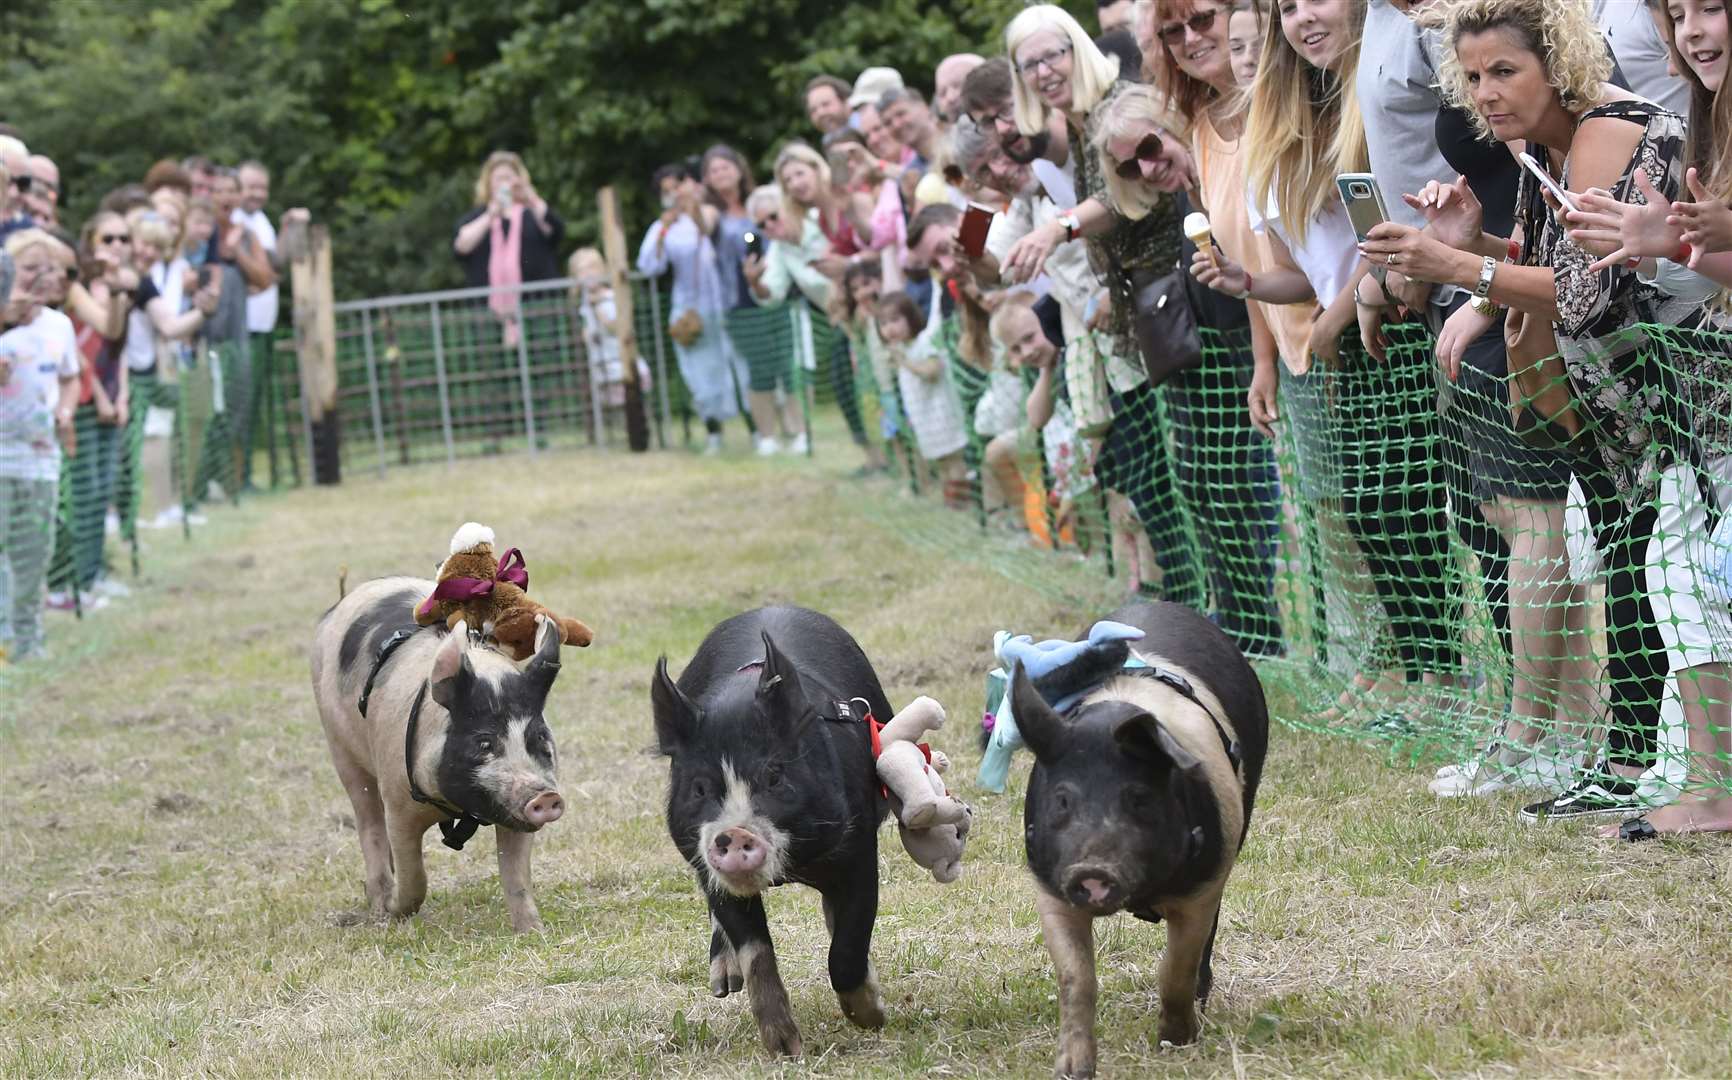 Pig racing at Brogdale's annual Cherry Fair Picture: Tony Flashman